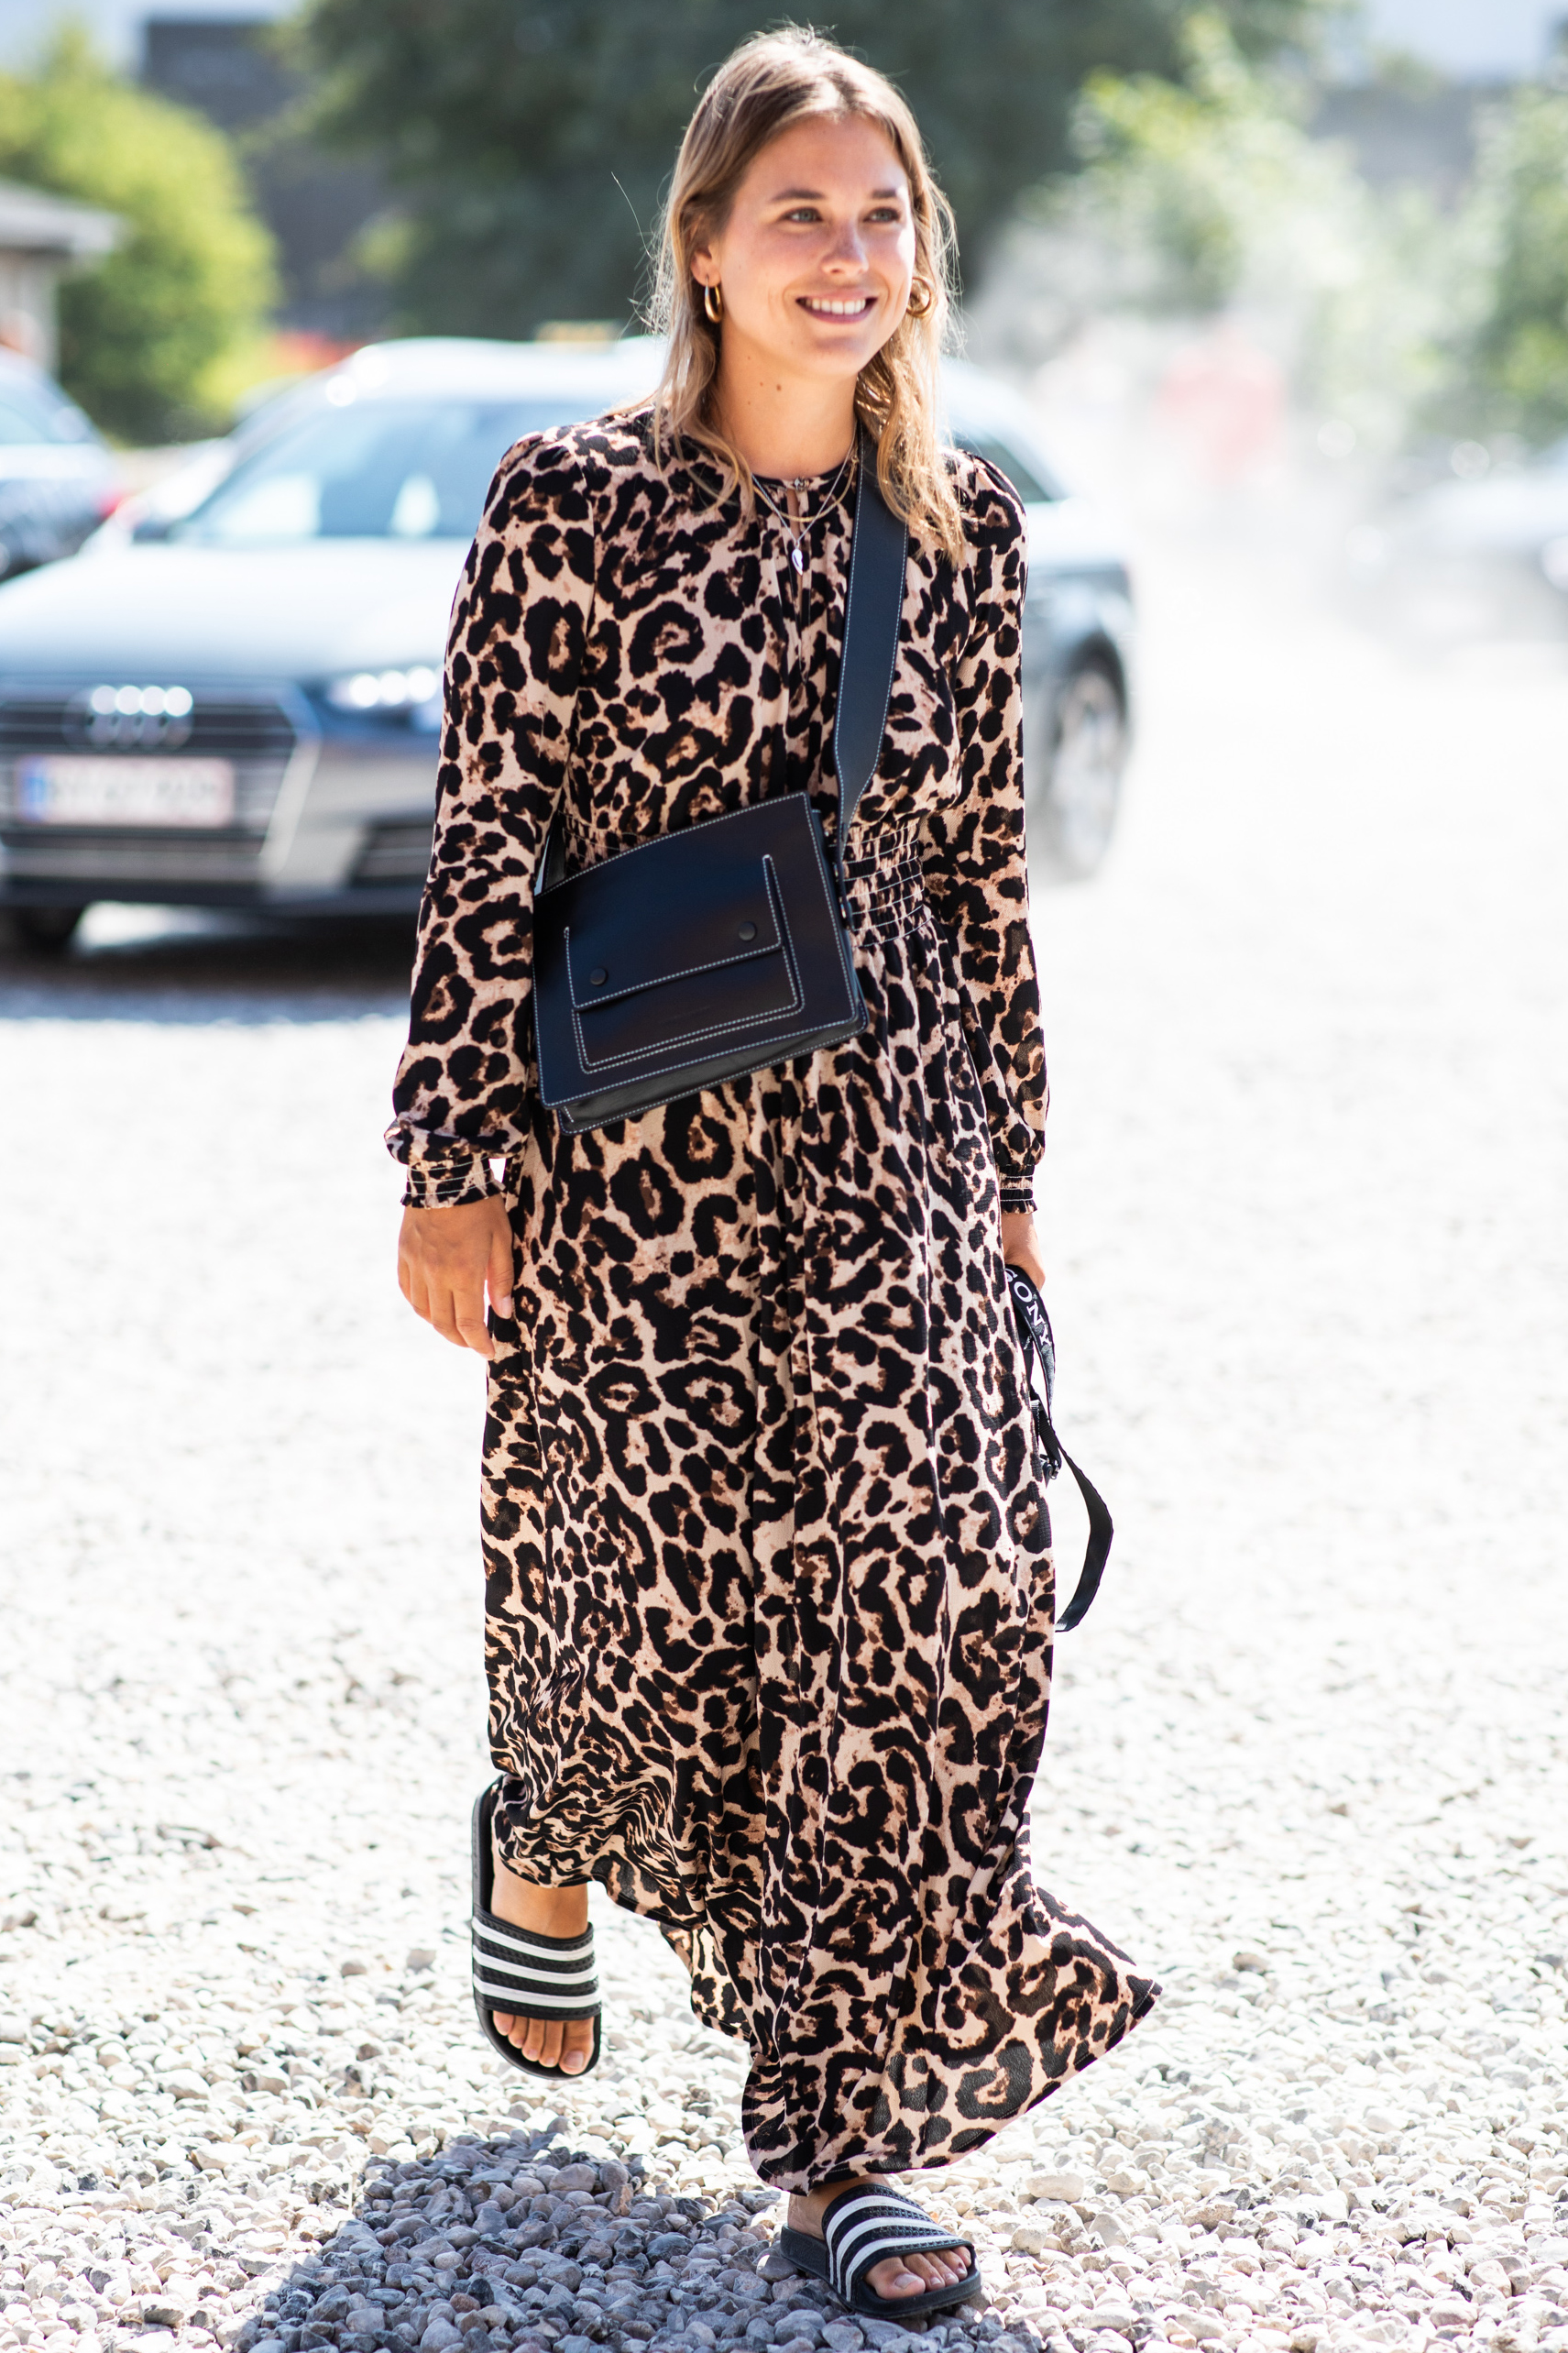 A Classic Way to Wear Leopard Print - M Loves M